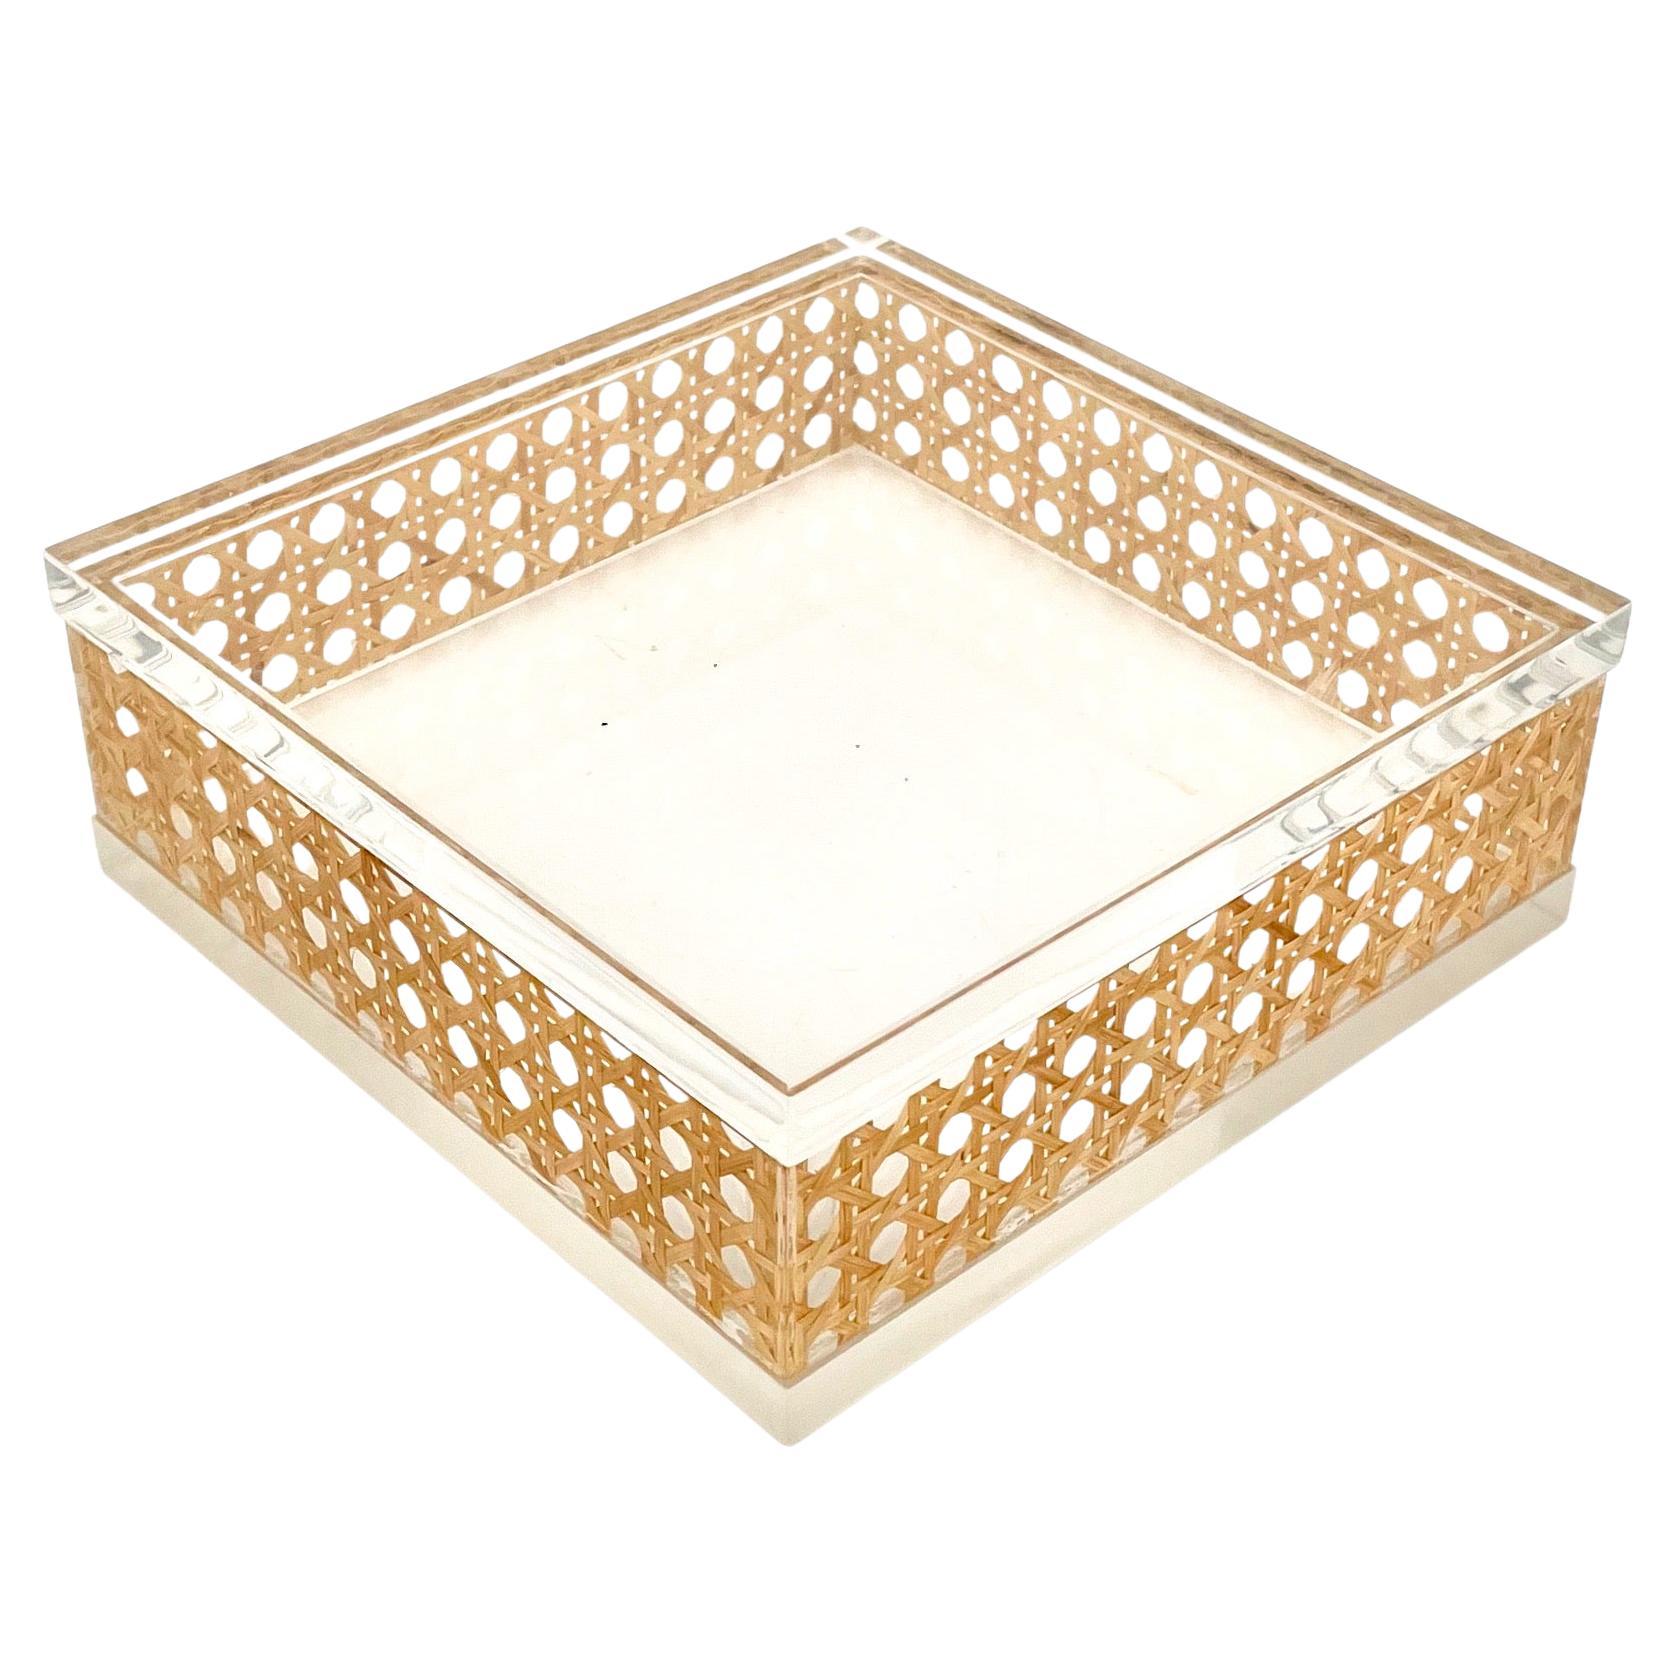 Squared Box Lucite and Rattan Christian Dior Home Style, Italy 1970s